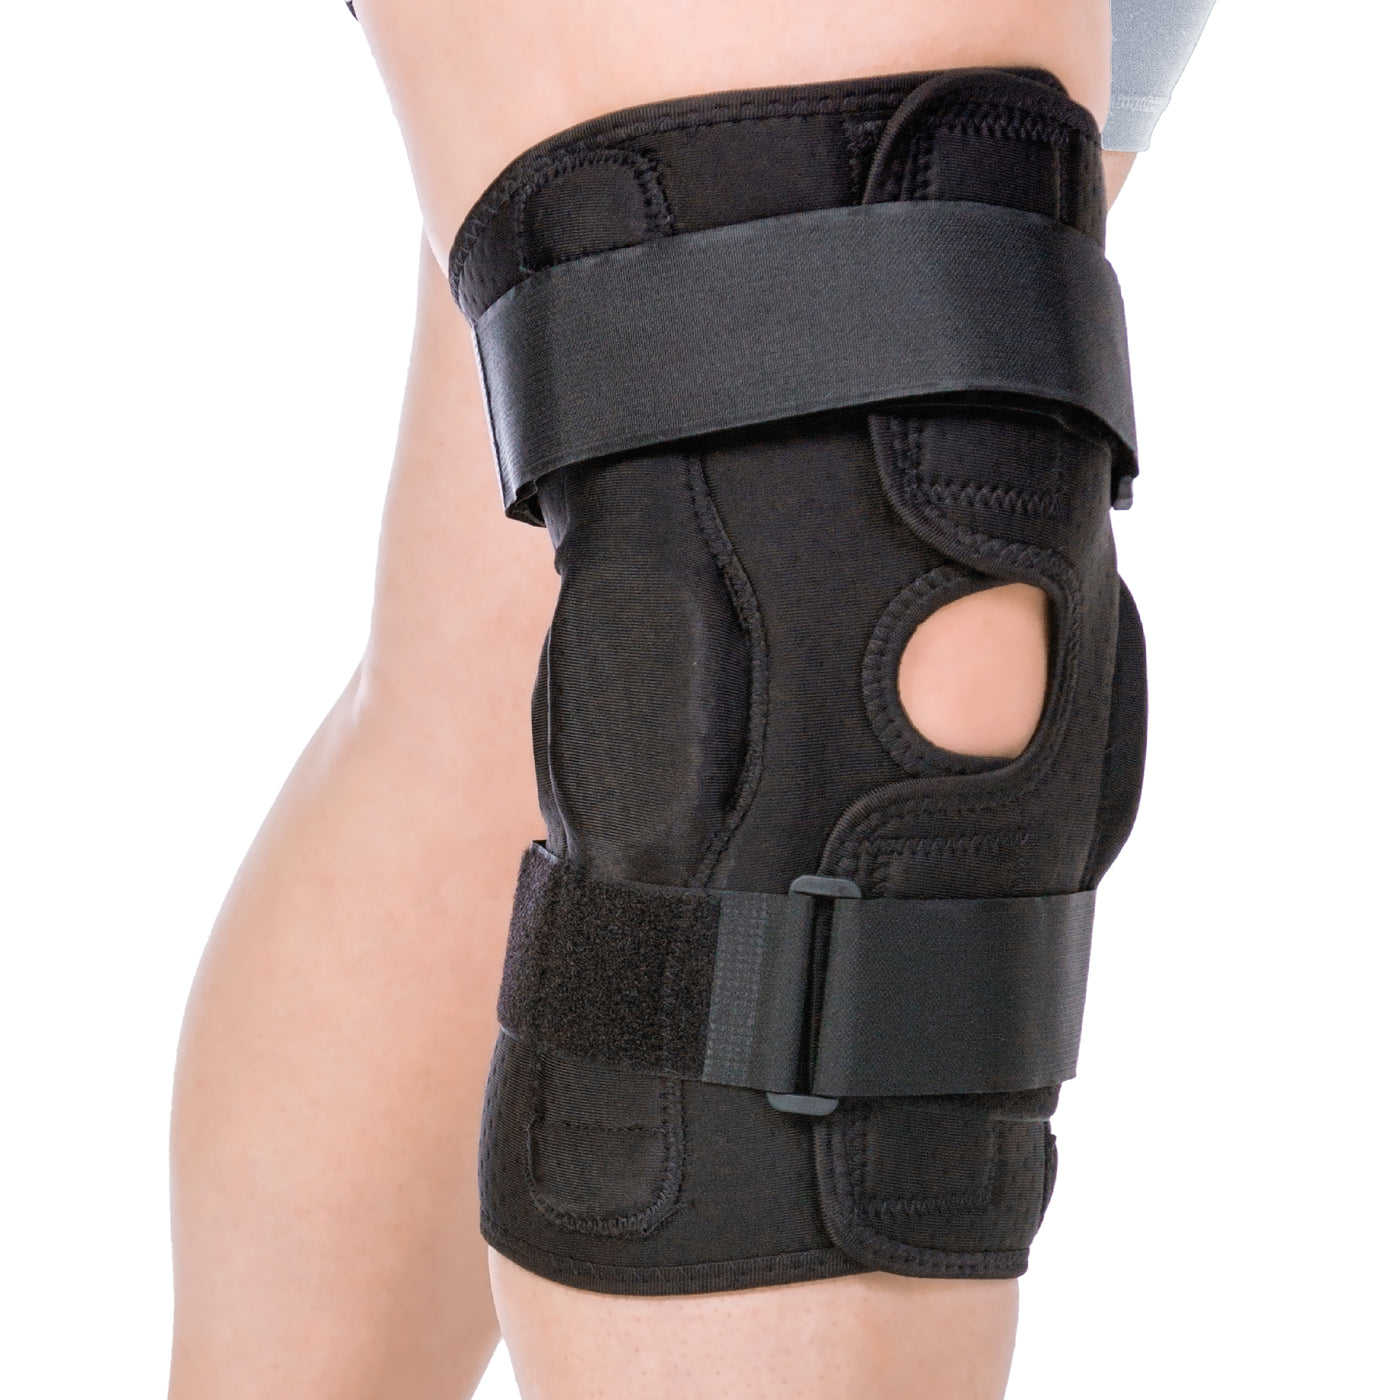 Hinged Knee Brace Post Op Knee Brace Knee Support Adjustable ROM Leg  Stabilizer Recovery Immobilization After Surgery for Torn Acl Meniscus Tear  Pcl